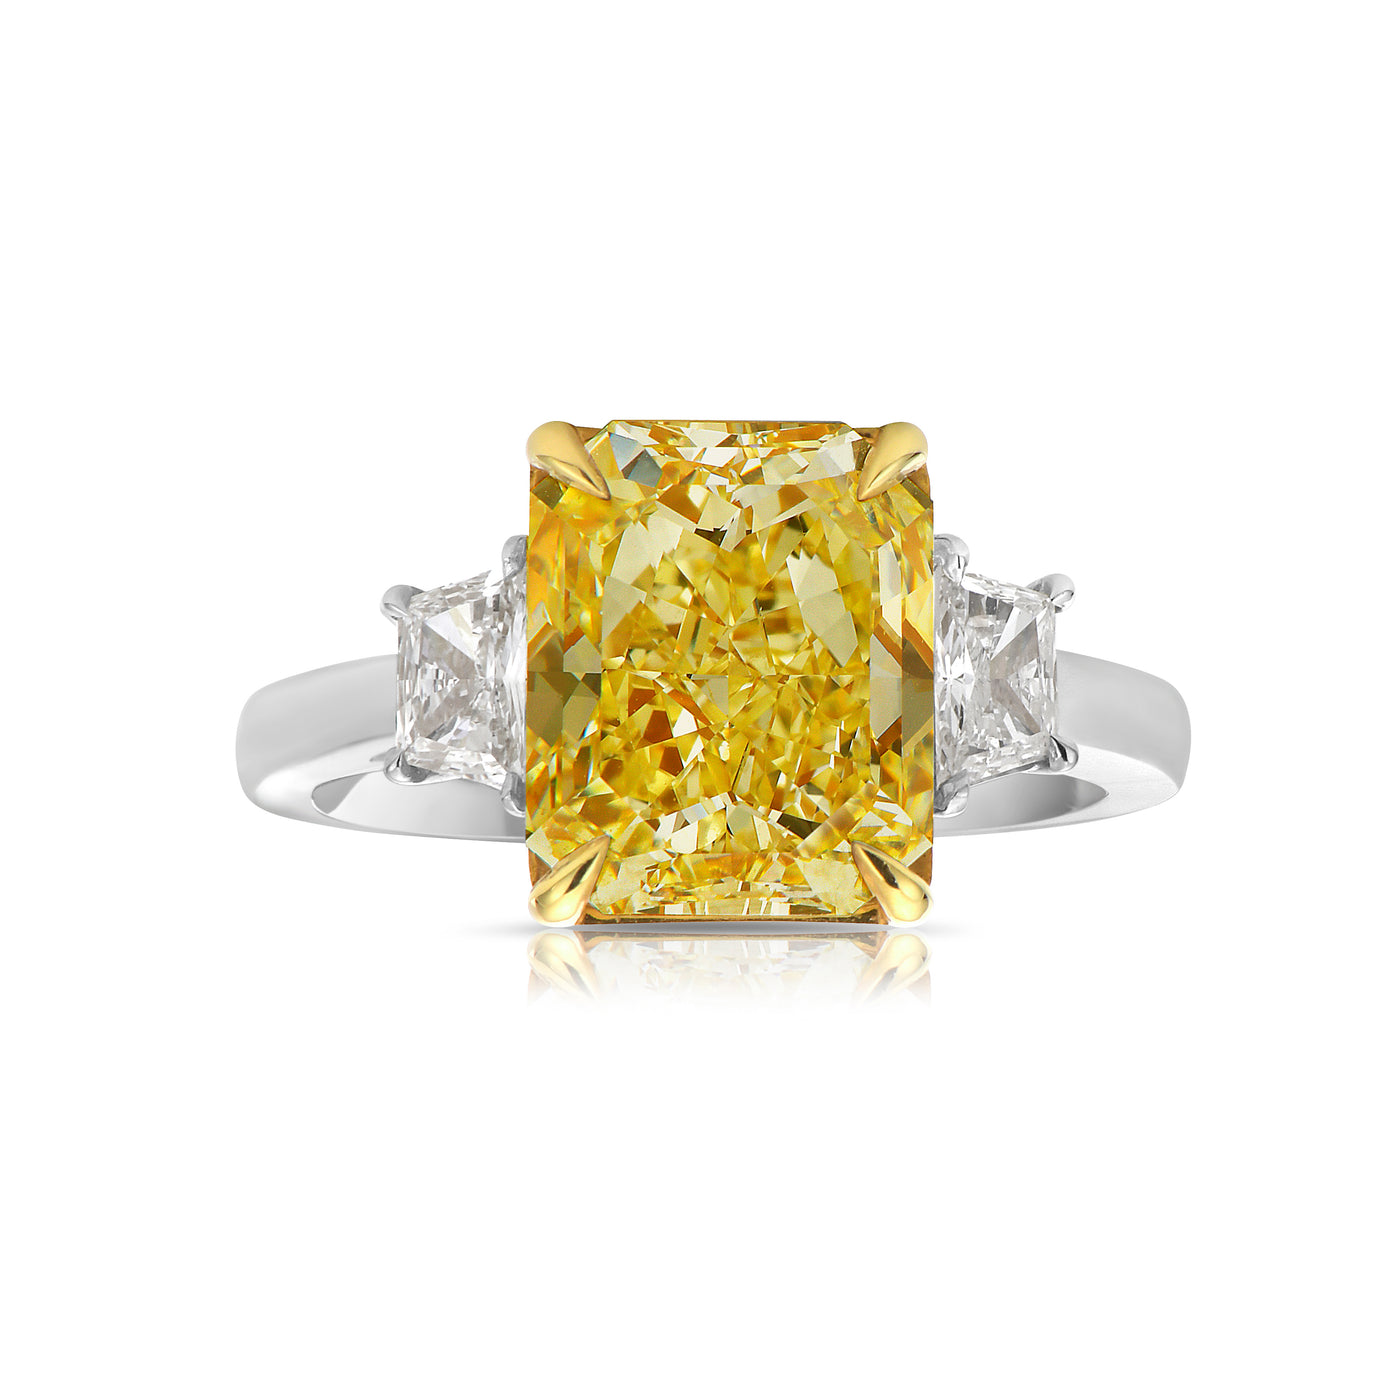 4.08ct Fancy Light Yellow Radiant SI2 Ring